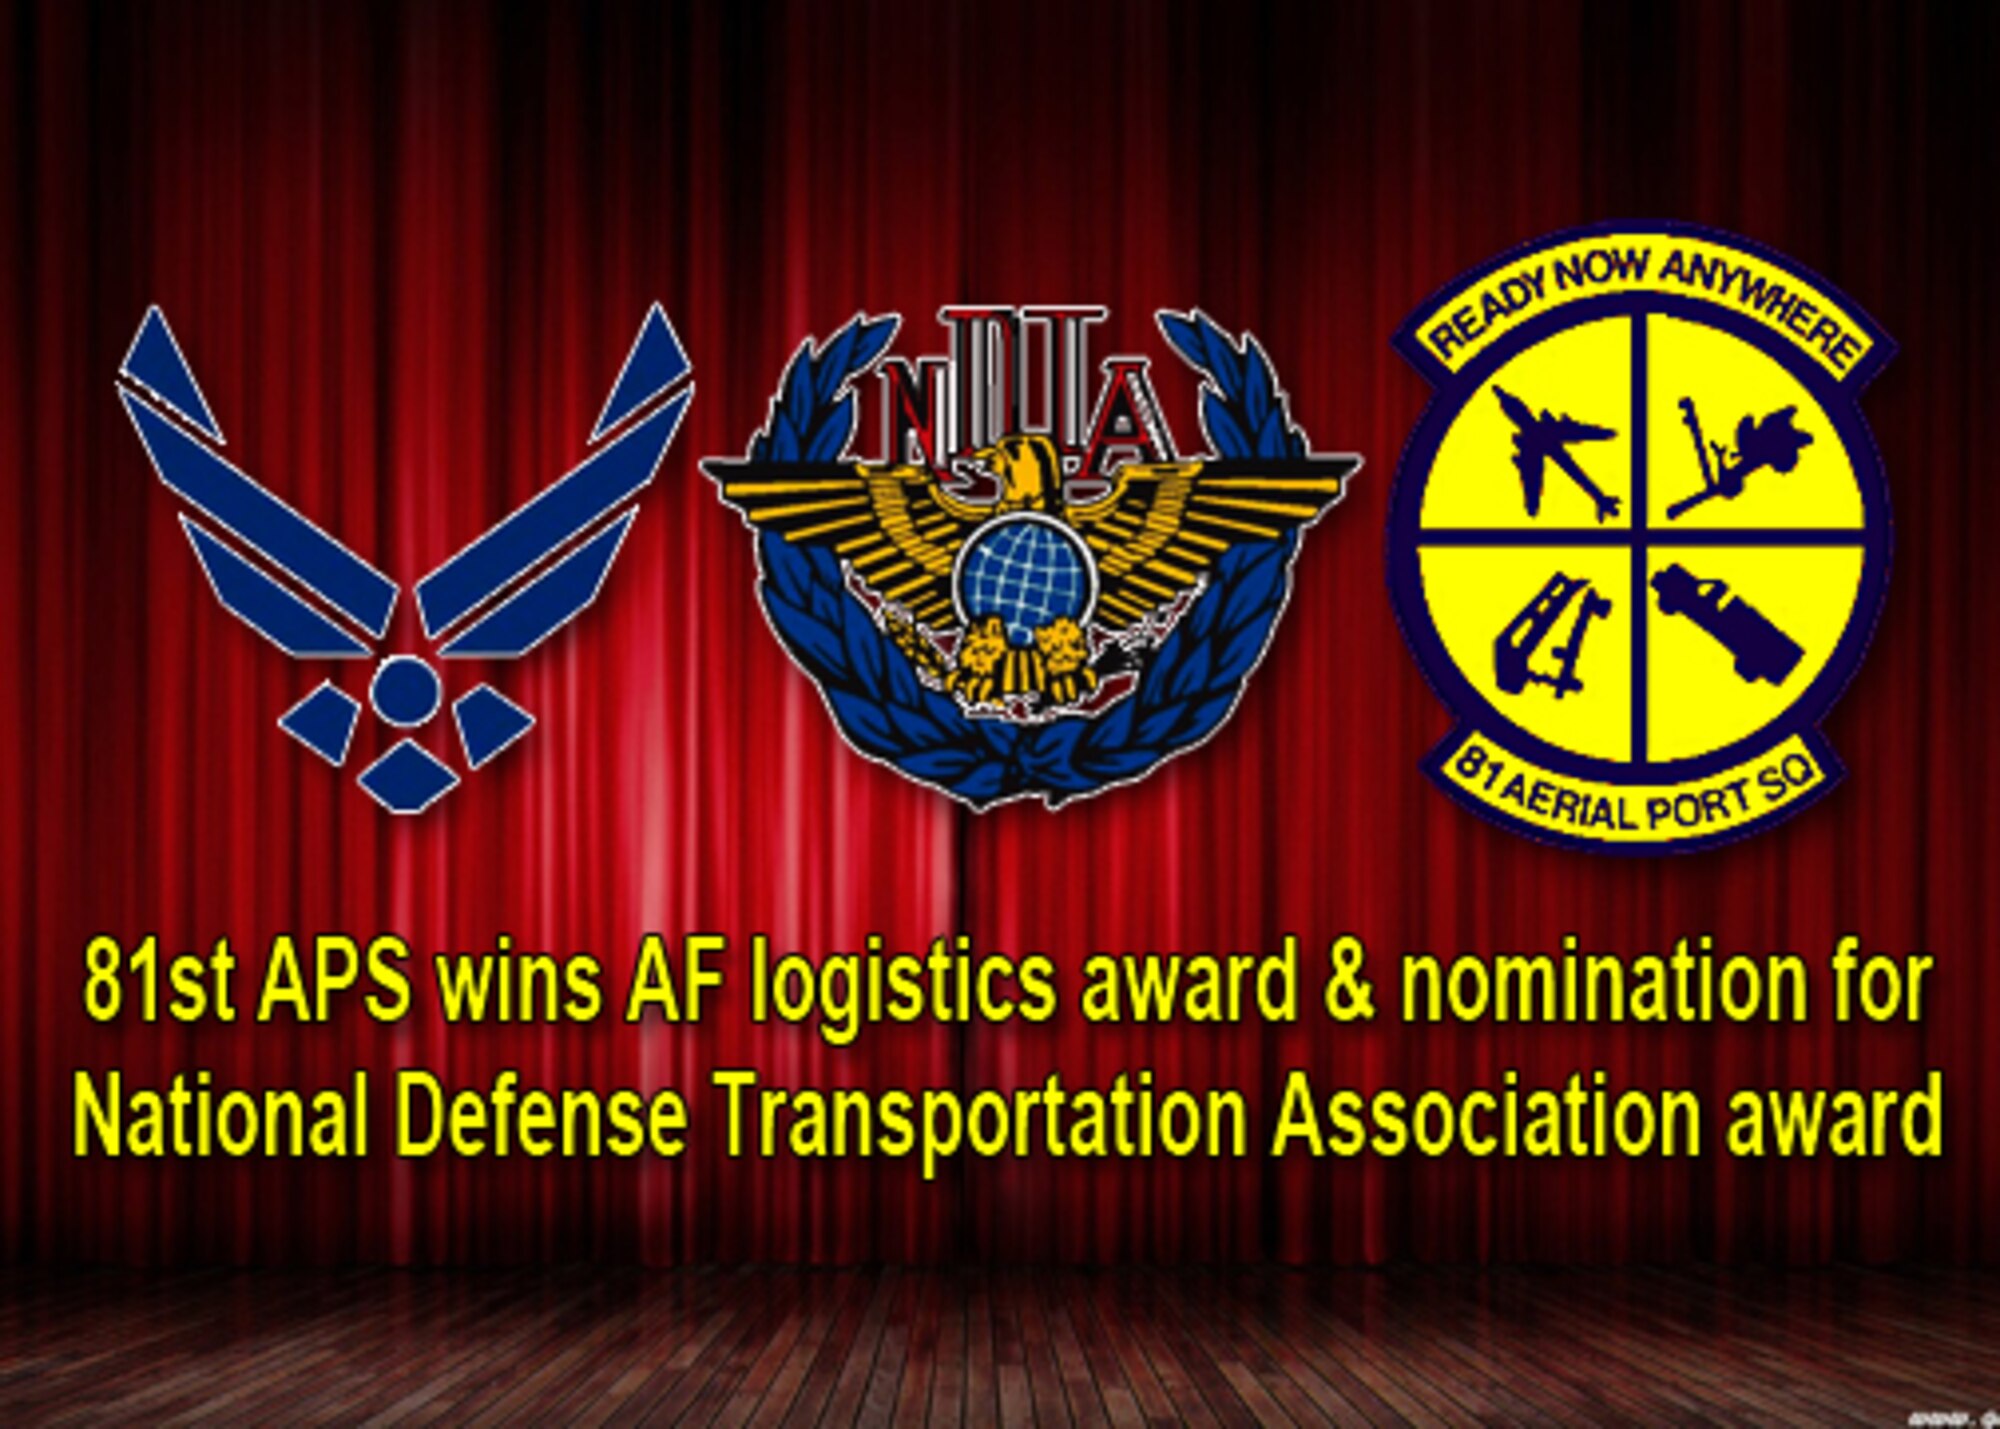 The 81st Aerial Port Squadron here was recently named a 2012 Air Force nominee for externally sponsored logistics awards nominee in the National Defense Transportation Association Unit Awards category by the Air Force Logistics Annual Awards Office.  (U.S. Air Force Reserve Illustration by Michael Dukes)

